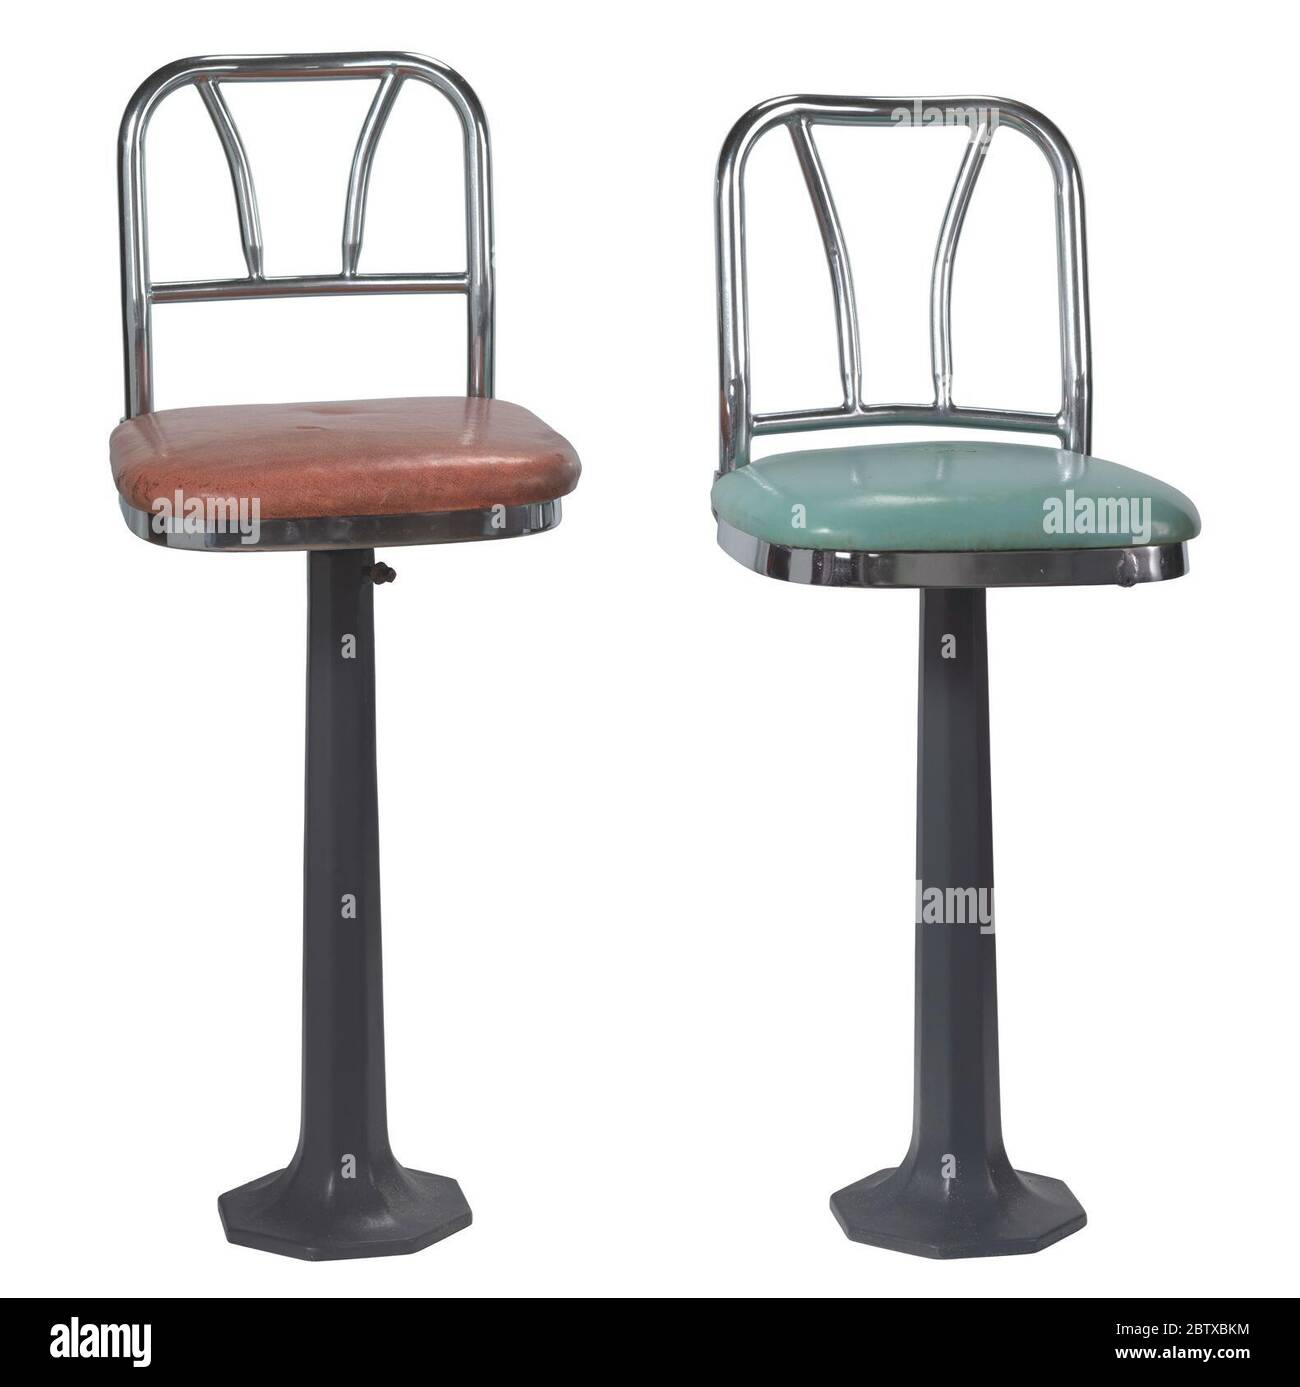 Lunch counter stool from Greensboro North Carolina sitins. A green lunch counter stool from the F. W. Woolworth department store in Greensboro, North Carolina. The back rest and frame of the seat are chrome plated metal. Stock Photo